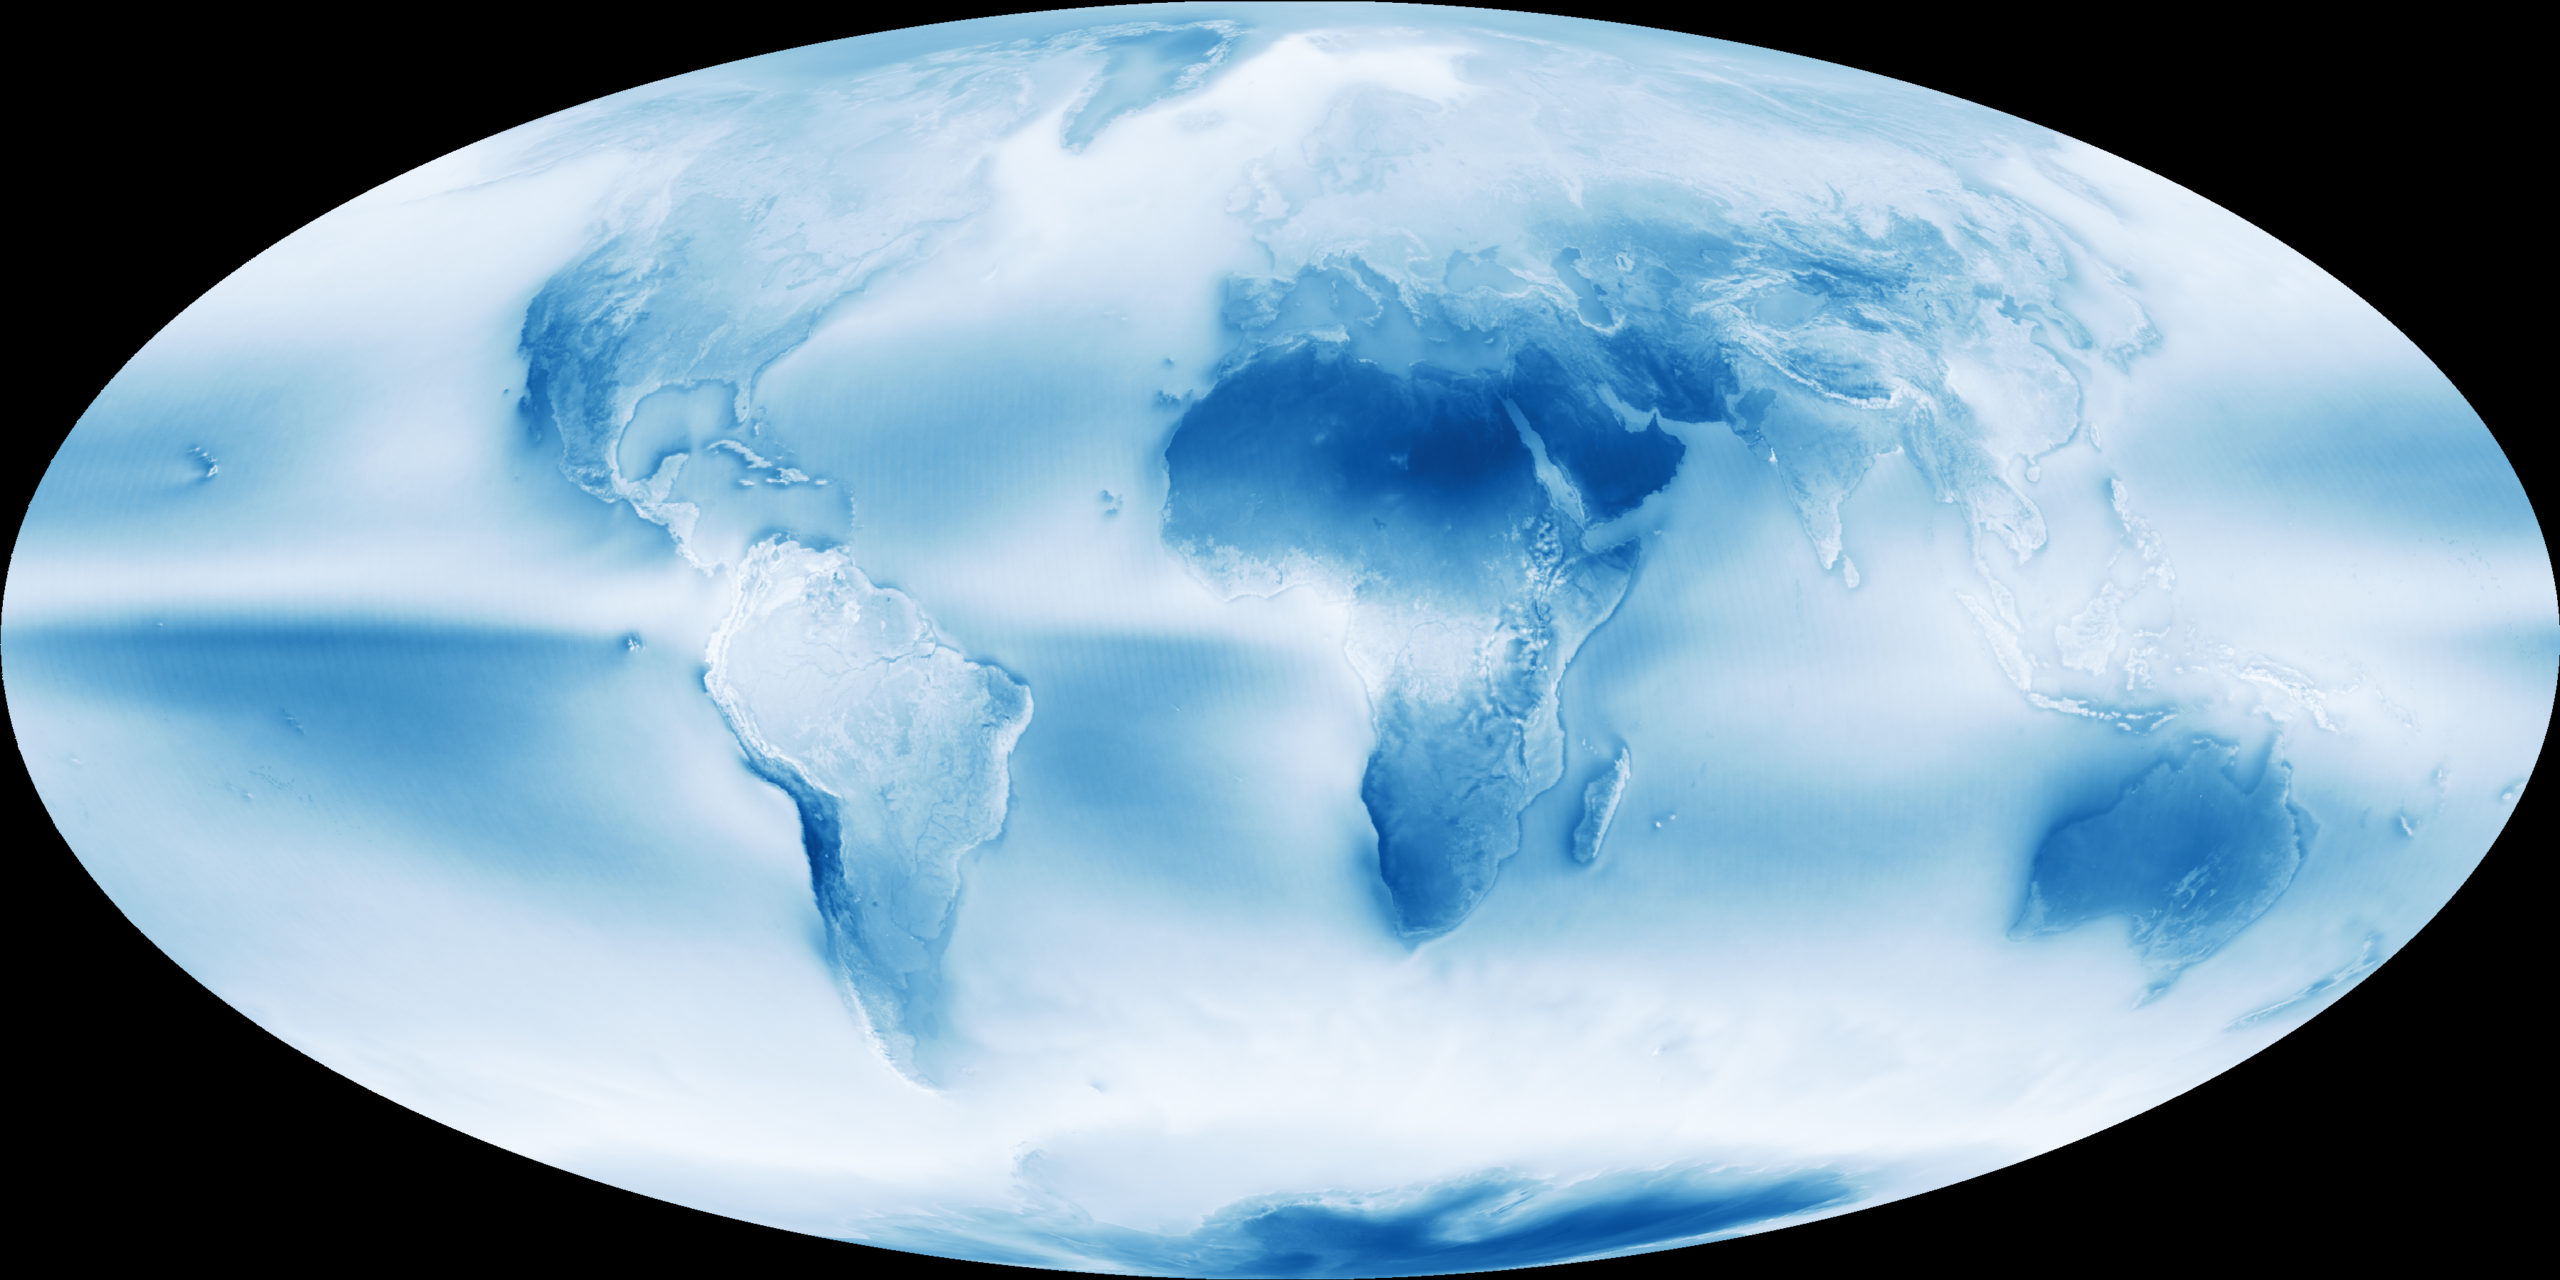 Photograph of cloudy earth in blue and white. 